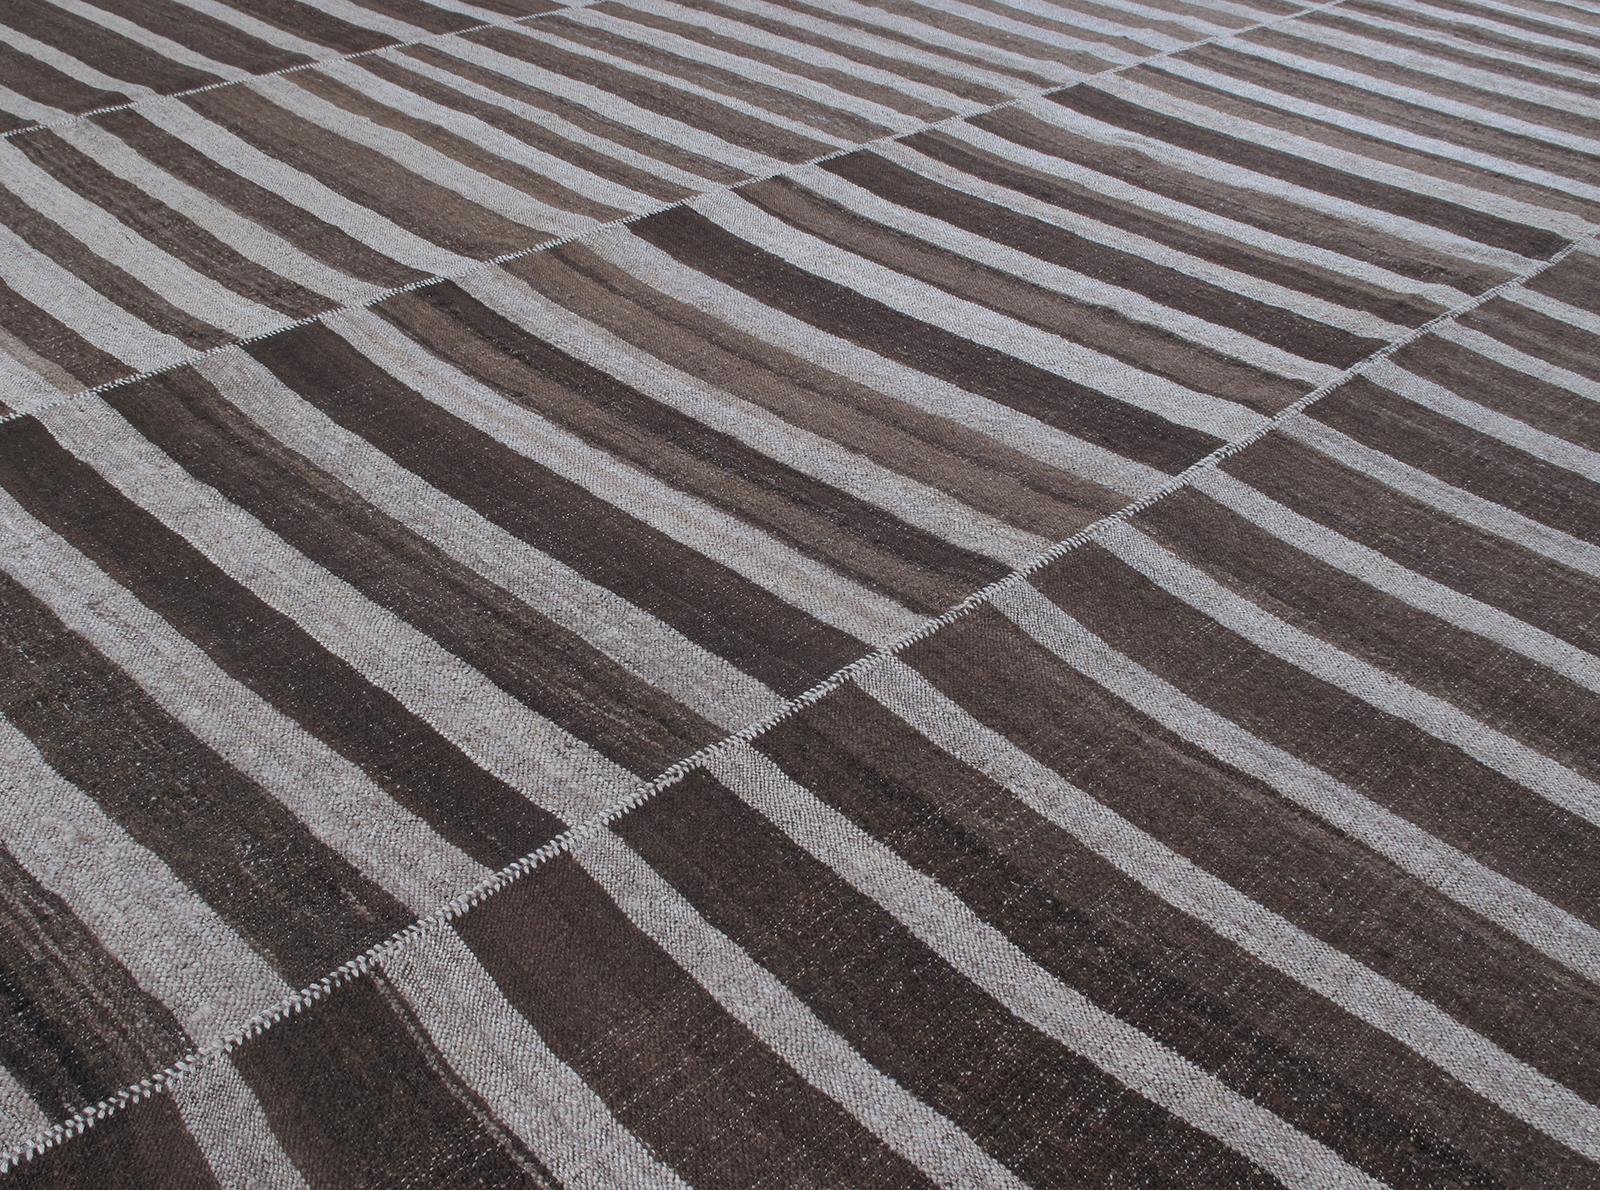 The Mid-Century Modern collection is skillfully sourced by N A S I R I and exclusive to our showroom. These flatweaves embody the Minimalist sophistication that emerged in the mid-20th century which continues to thrive today. We bridge the elements